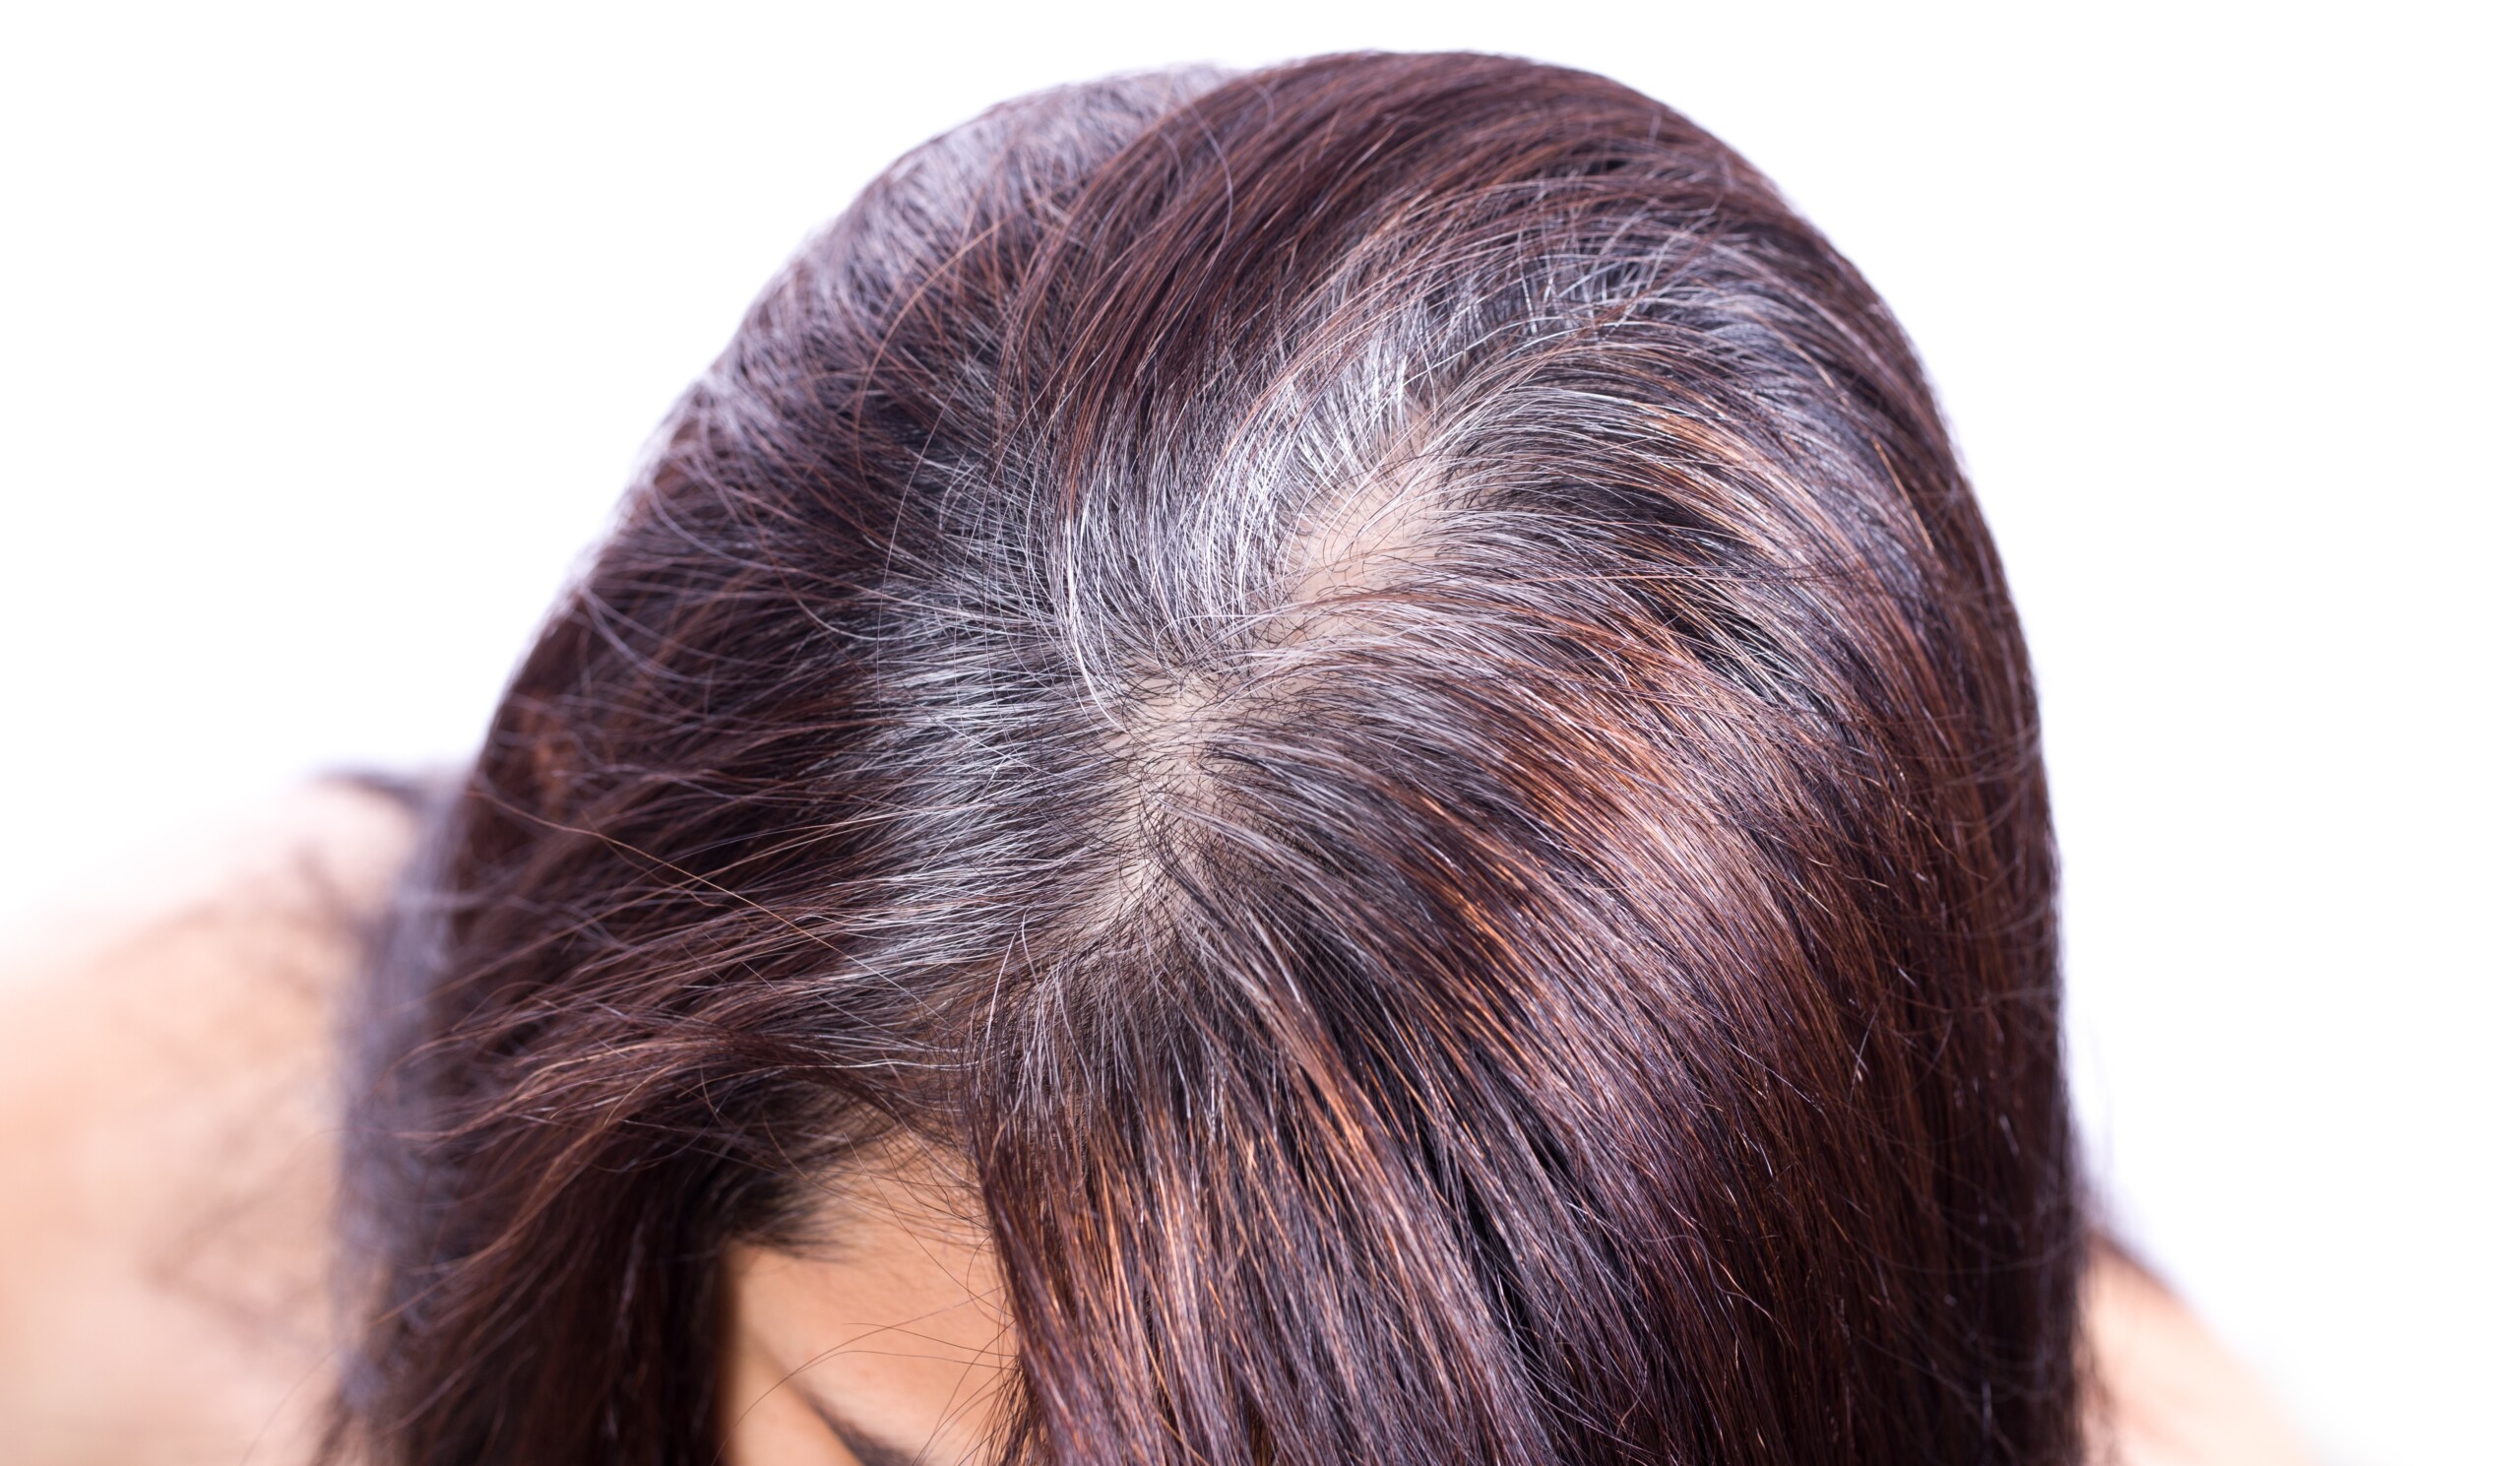 Can Grey Hair Be Caused by Minoxidil? » Scary Symptoms